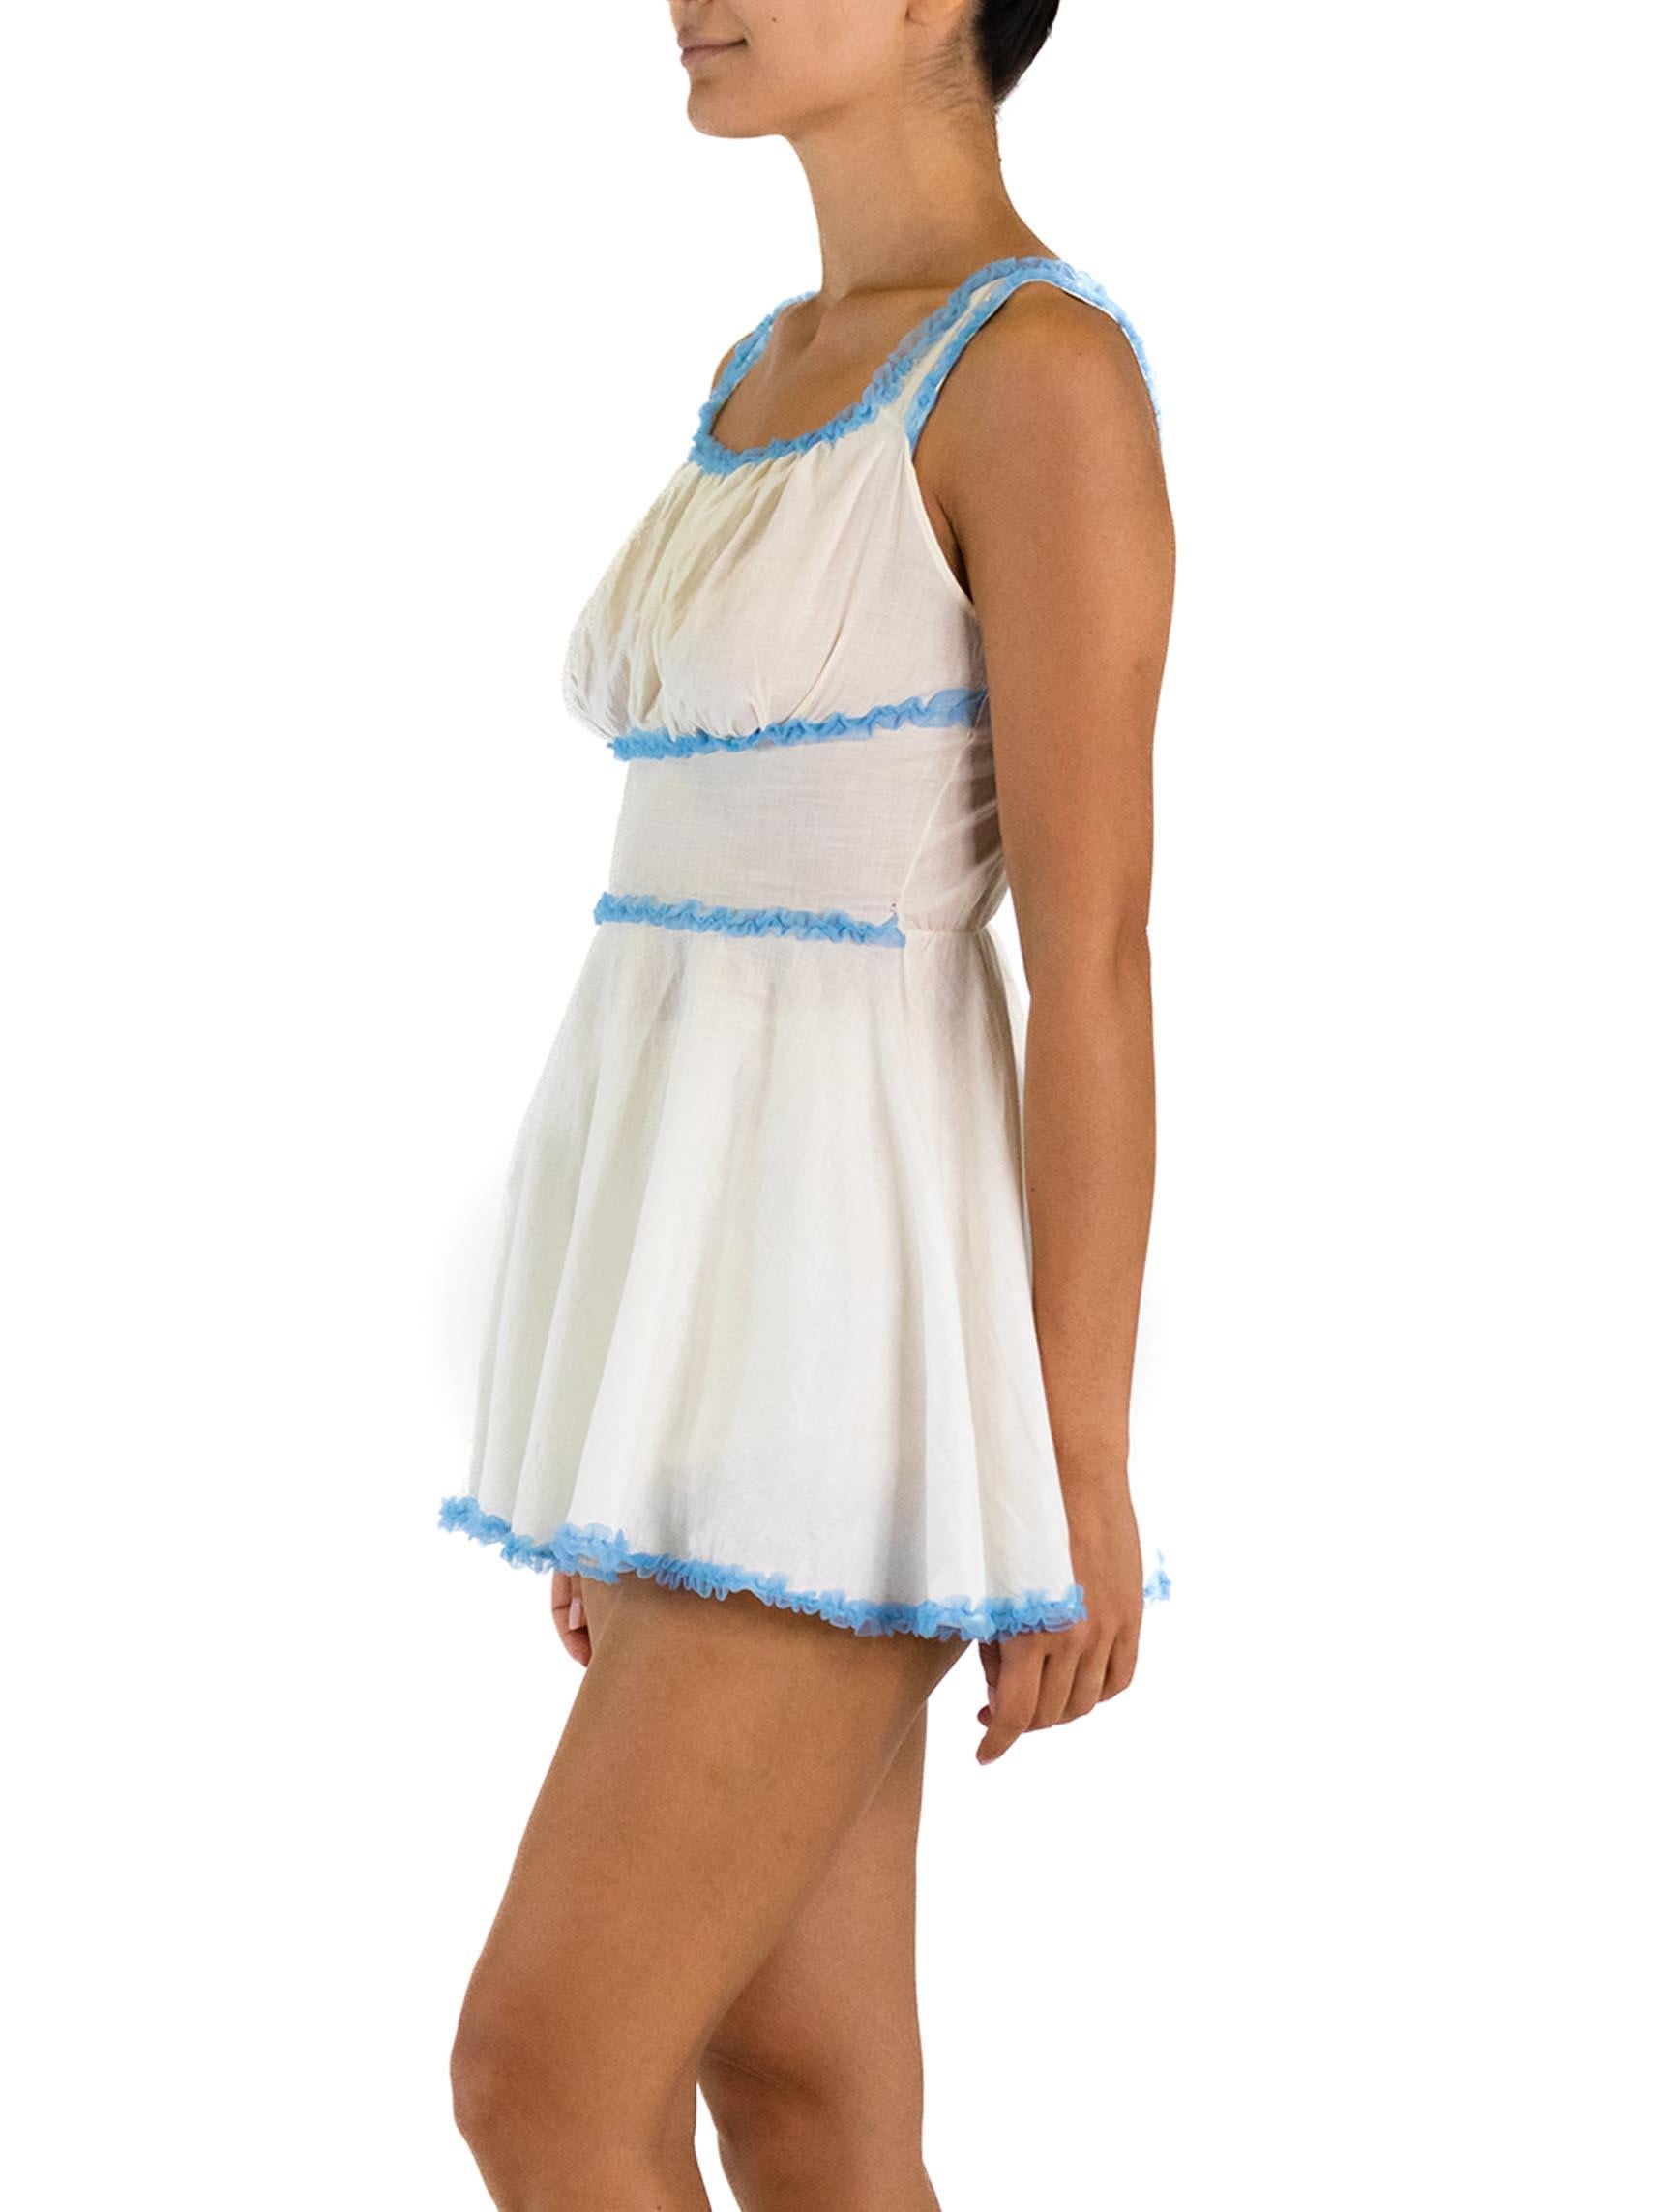 High waisted panties have lots of stretch 1940S White Cotton Blue Chiffon Ruffle Trim Negligee & Shorts Set 